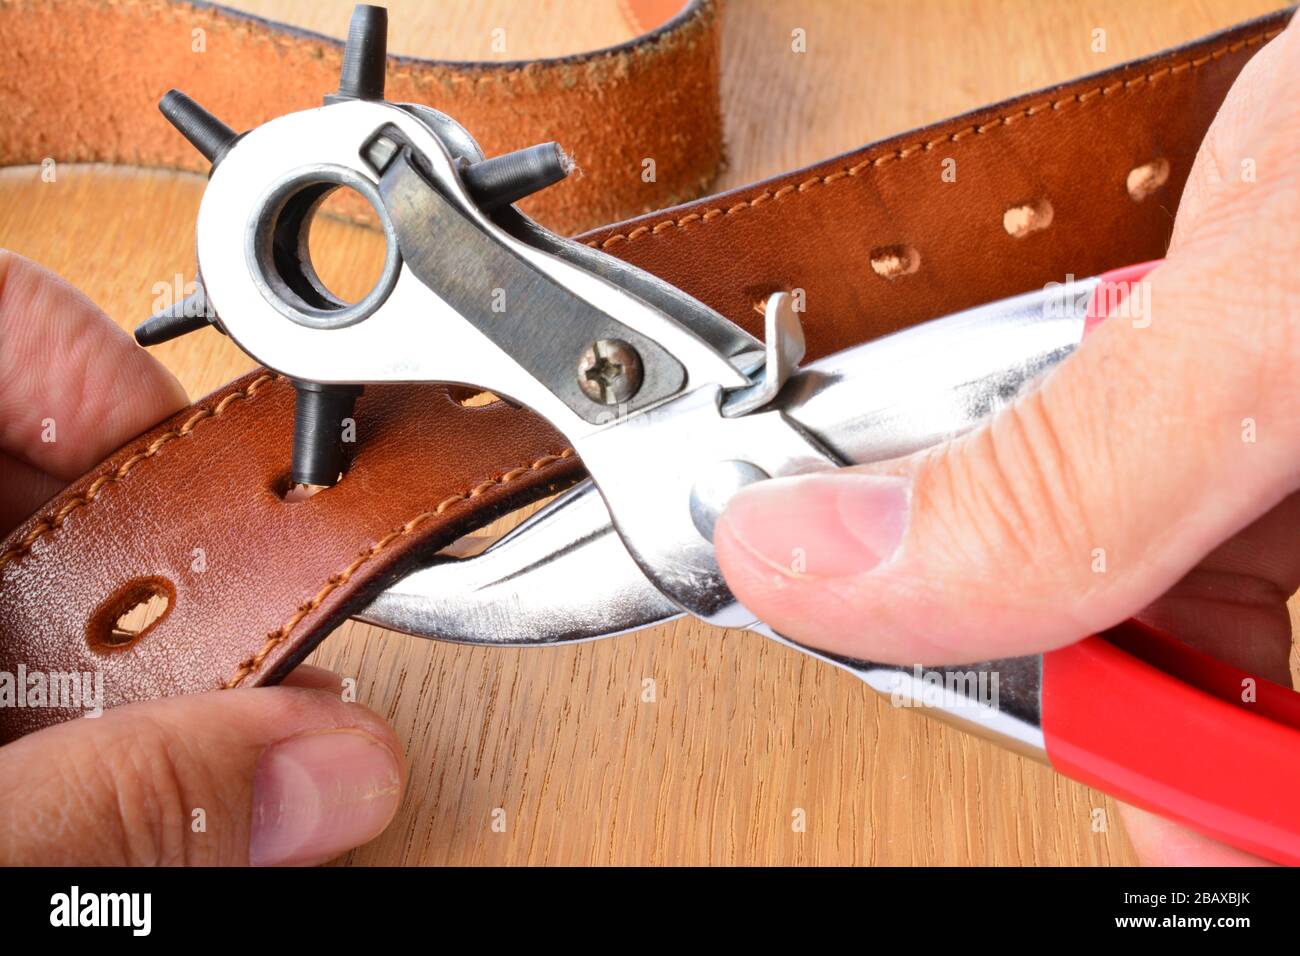 Leather girdle perforation, punch tool and new leather belt in craftman's hands over wooden background Stock Photo